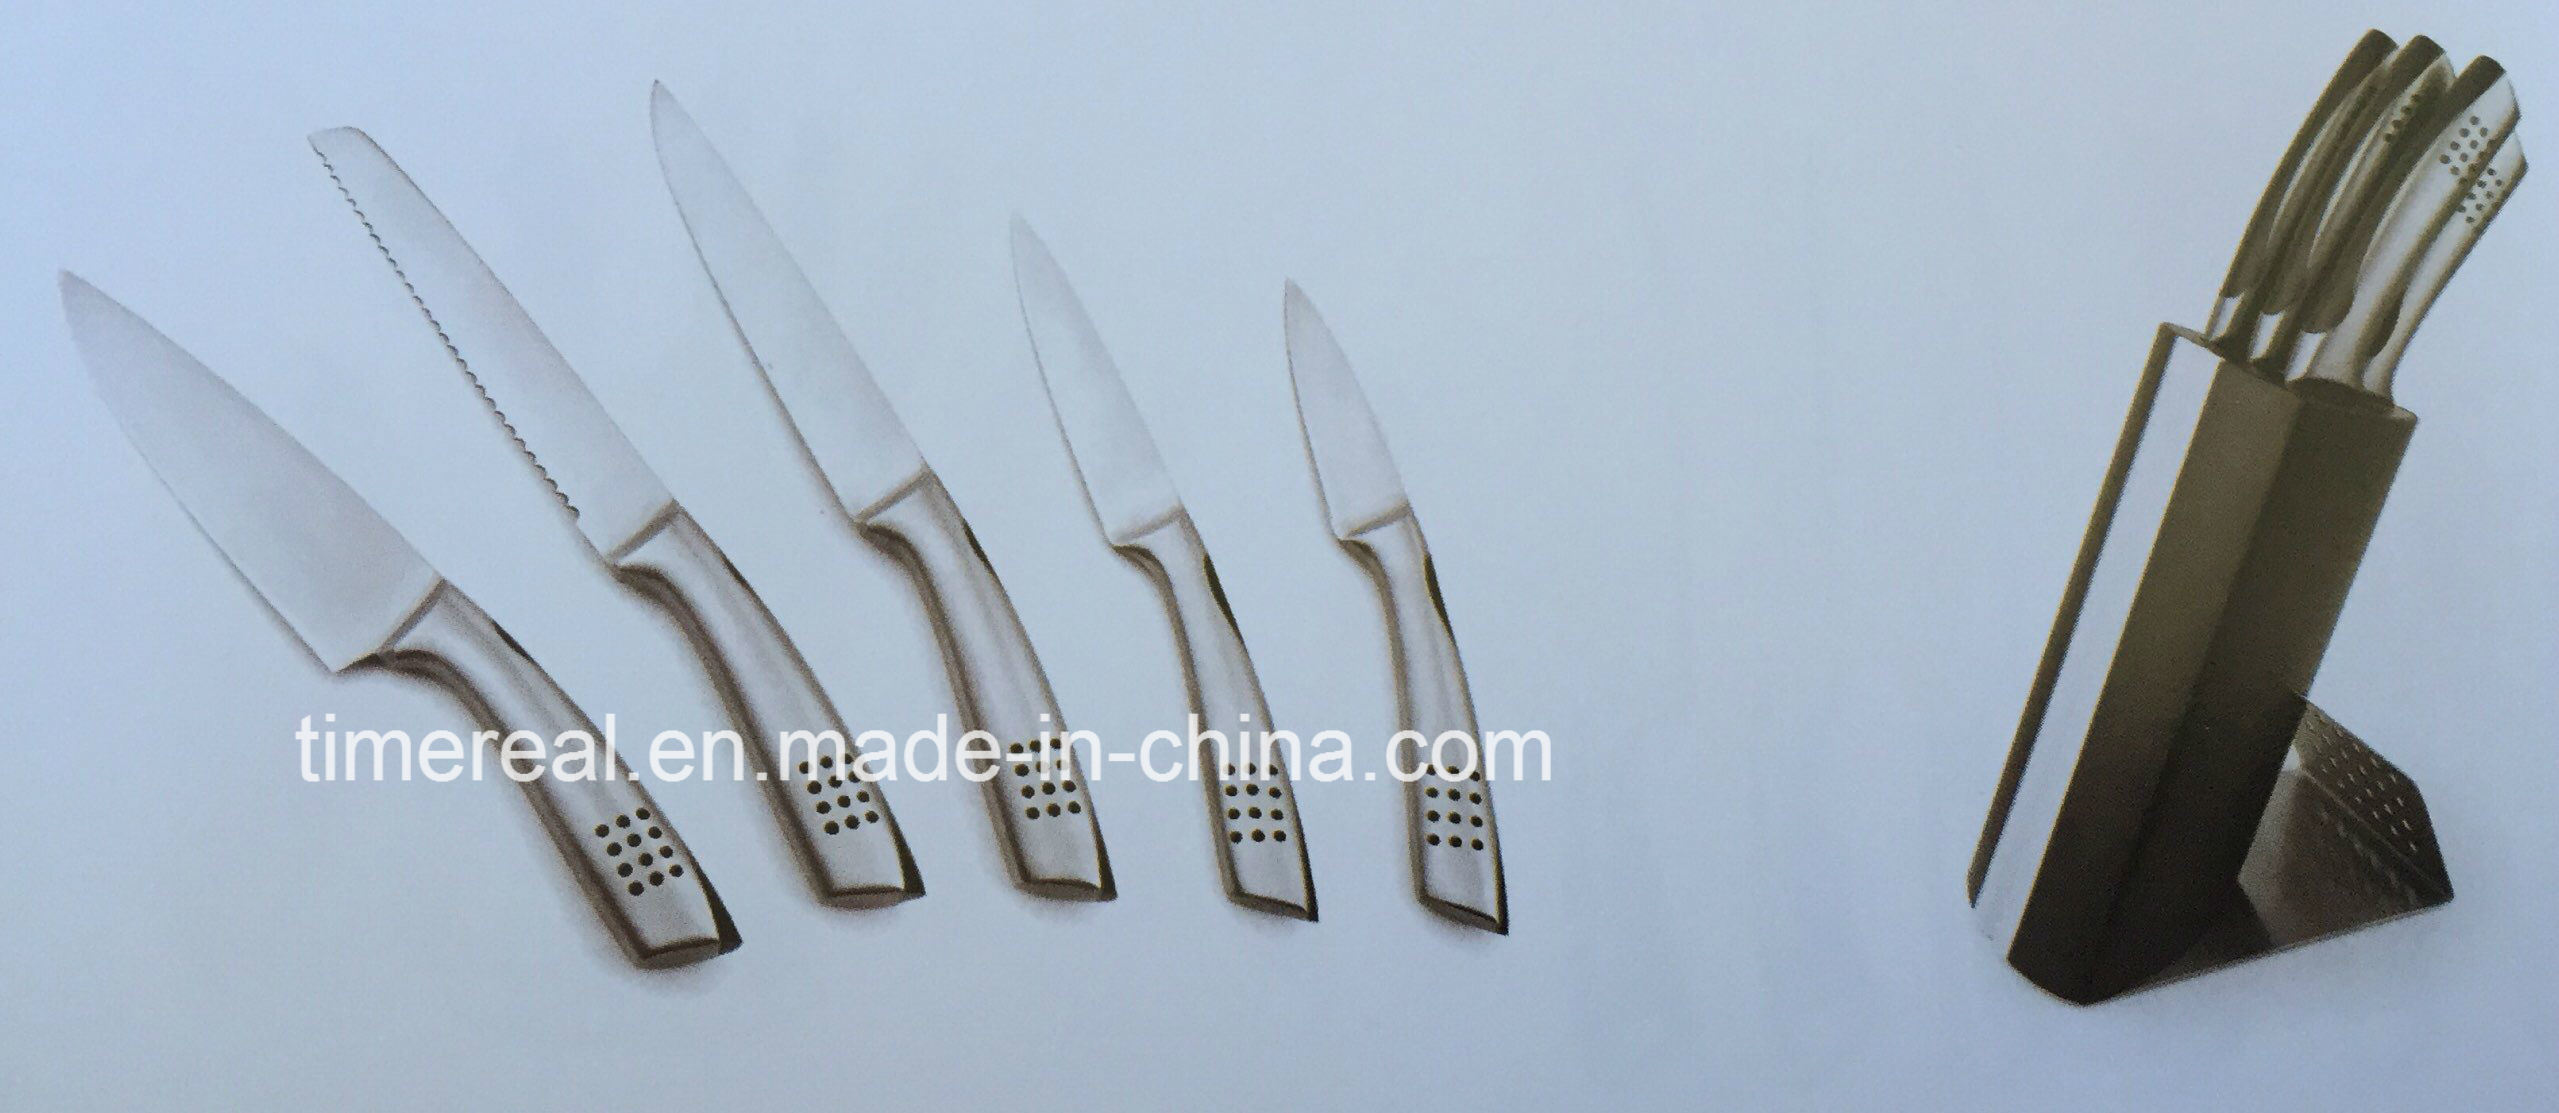 China Manufacturer for Utility Knife -
 Stainless Steel Kitchen Knives Set with Painting No. Fj-0049 – Long Prosper